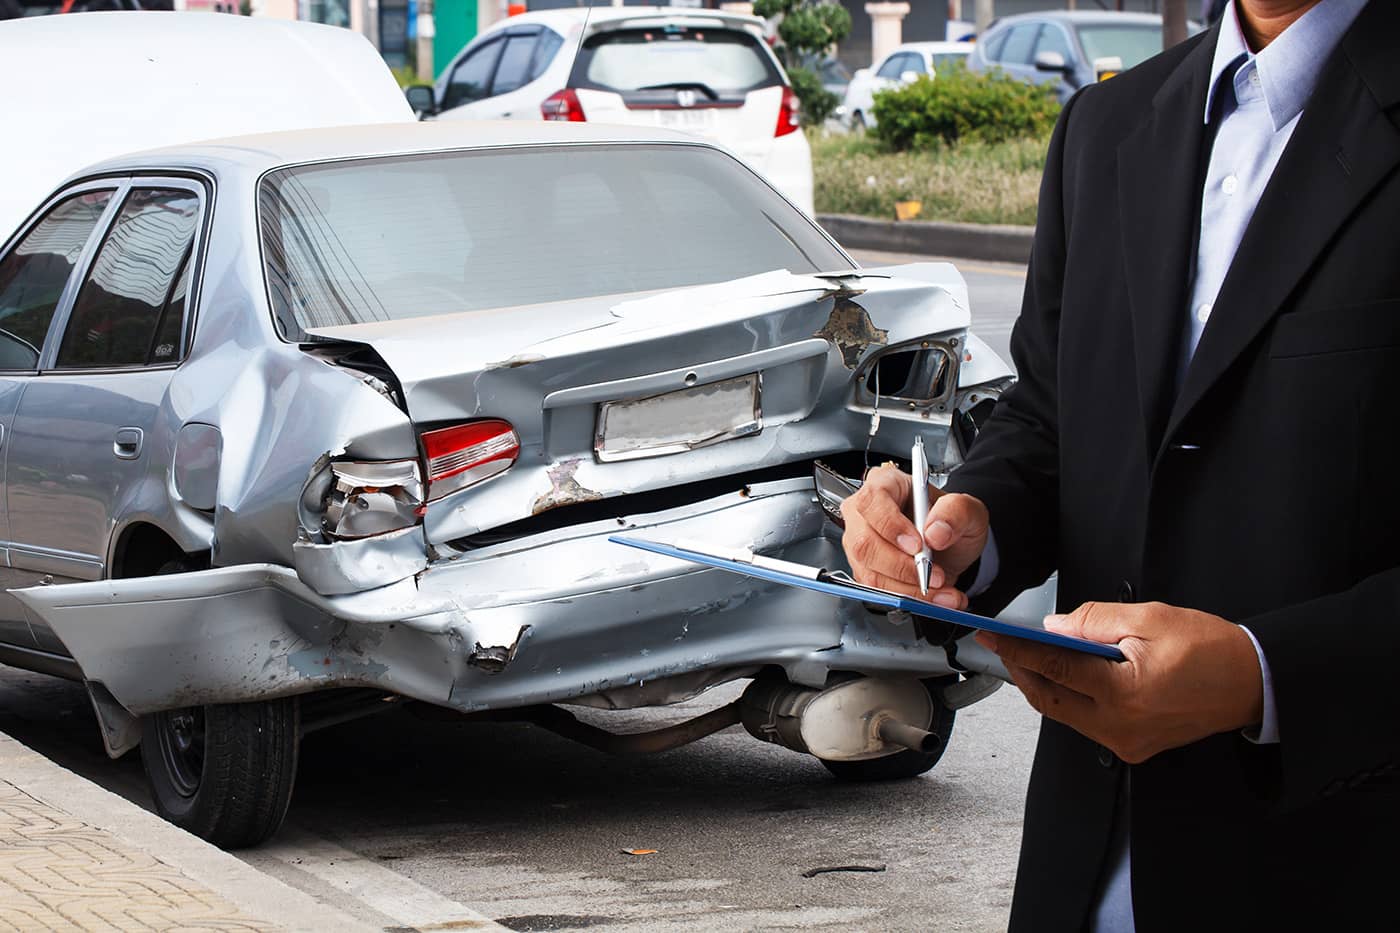 Know About Car Insurance. Insurance Company Tactics in Accident Claims